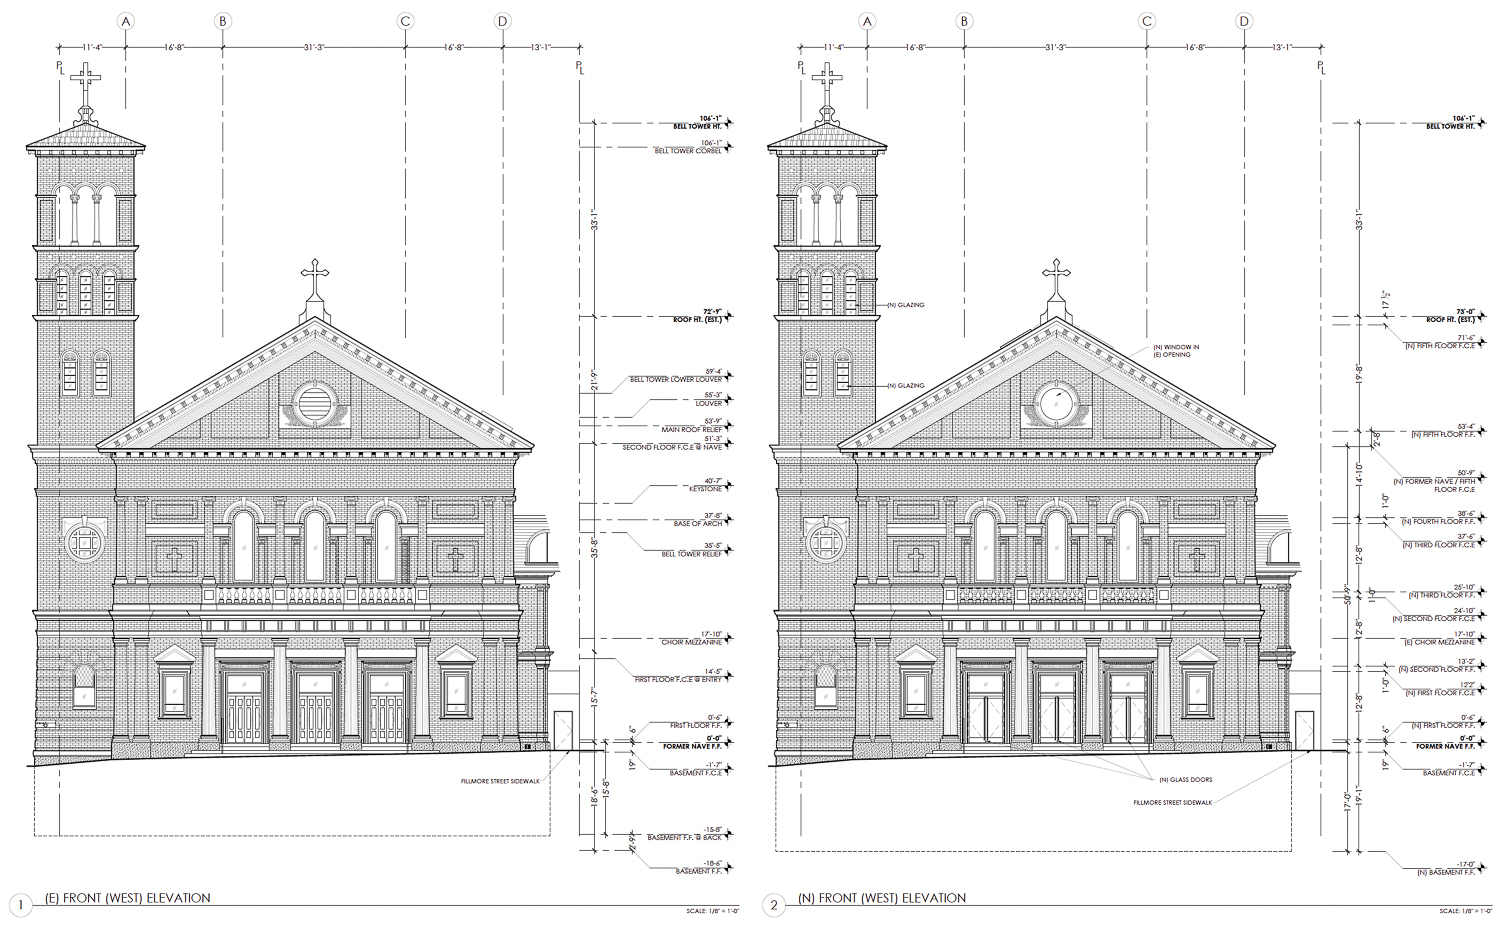 554 Fillmore Street front facade elevation showing existing condition (left) and proposed changes (right), illustration by Architects SF